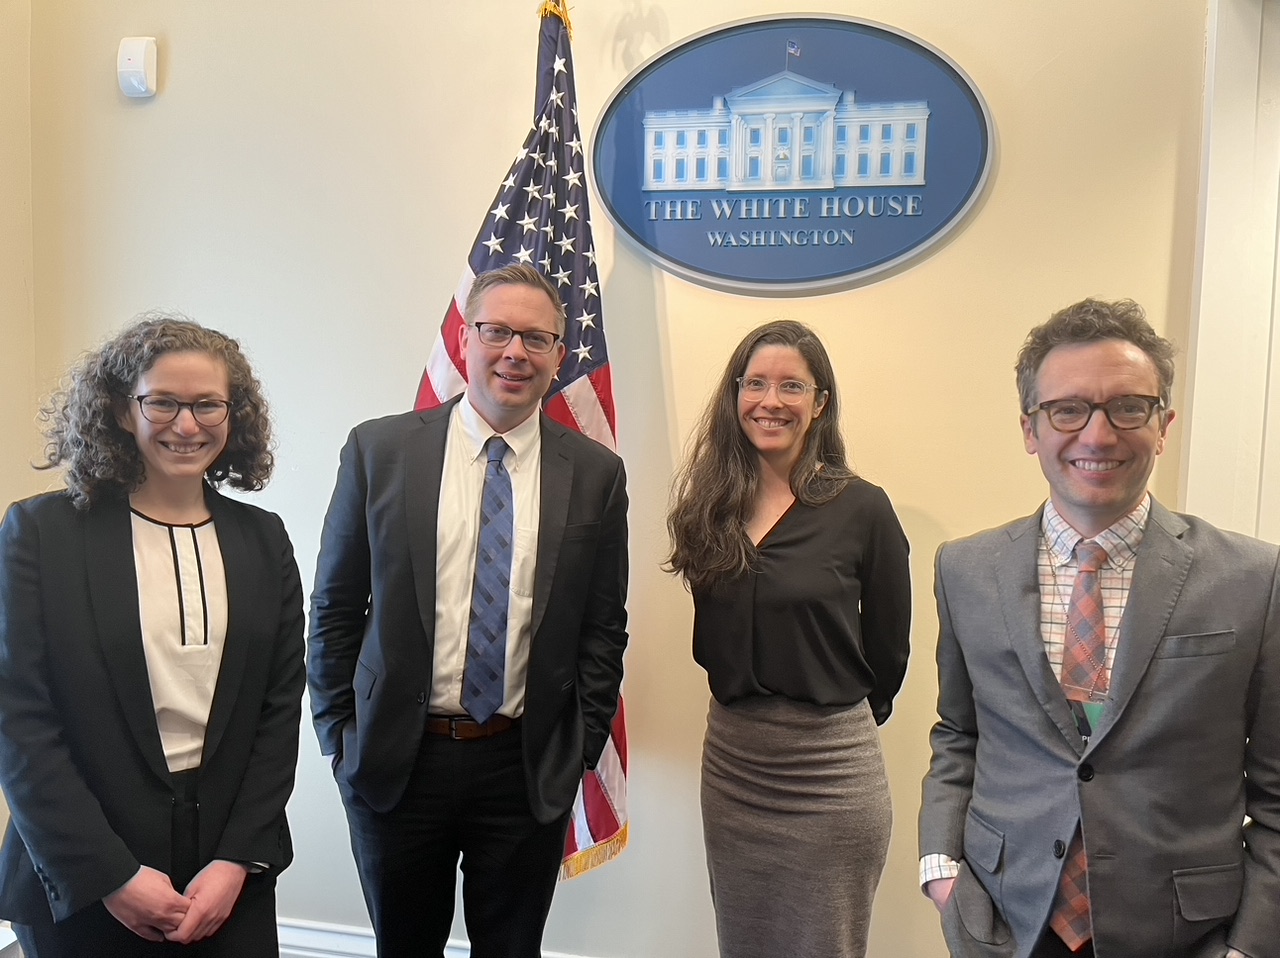 From left to right: Lori Ferriss, AIA (Northeastern University, Architecture 2030); Michael Gryniuk (Cora Structural, Co-Chair SE2050); Heather Clark (Senior Director of Building Sector, White House Climate Policy Office); Tim Lock (Management Partner, OPAL)